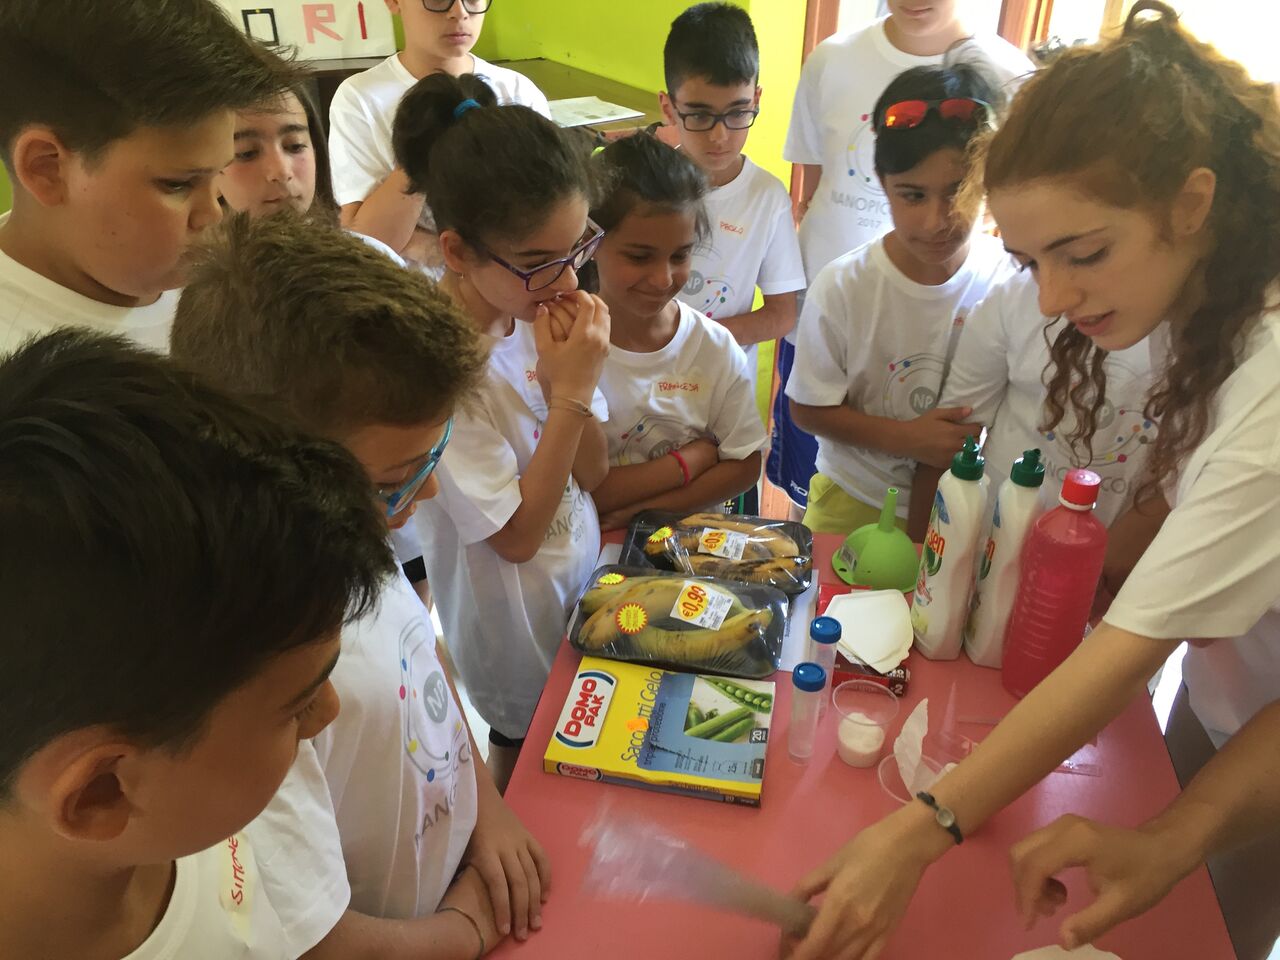 The town's NanoPiccola’s participants learning about nanoscience with experiments and hands-on activities taught by trained students.